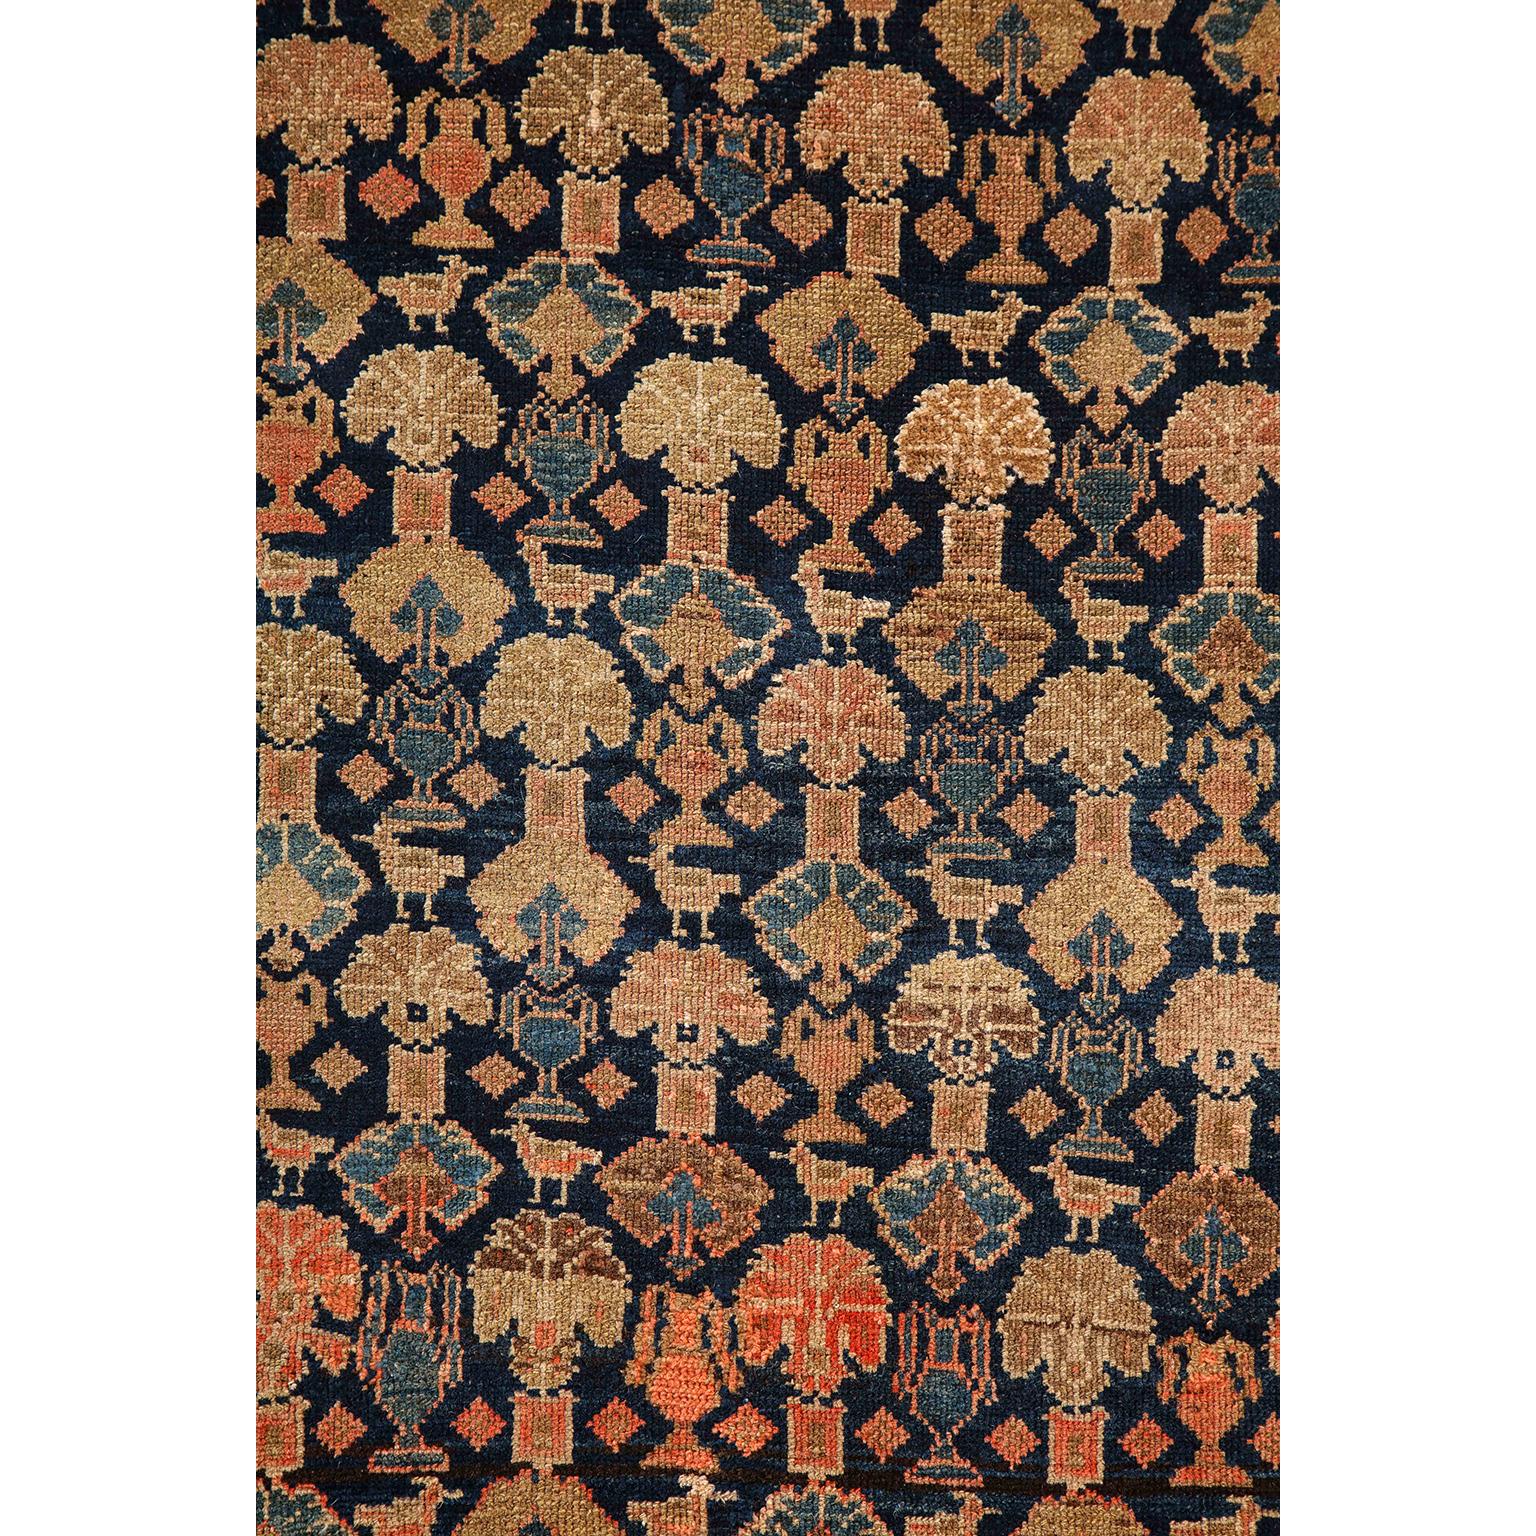 Vegetable Dyed Antique 1900s Persian Malayer Rug, Flower Motifs, Wool, 5' x 7' For Sale